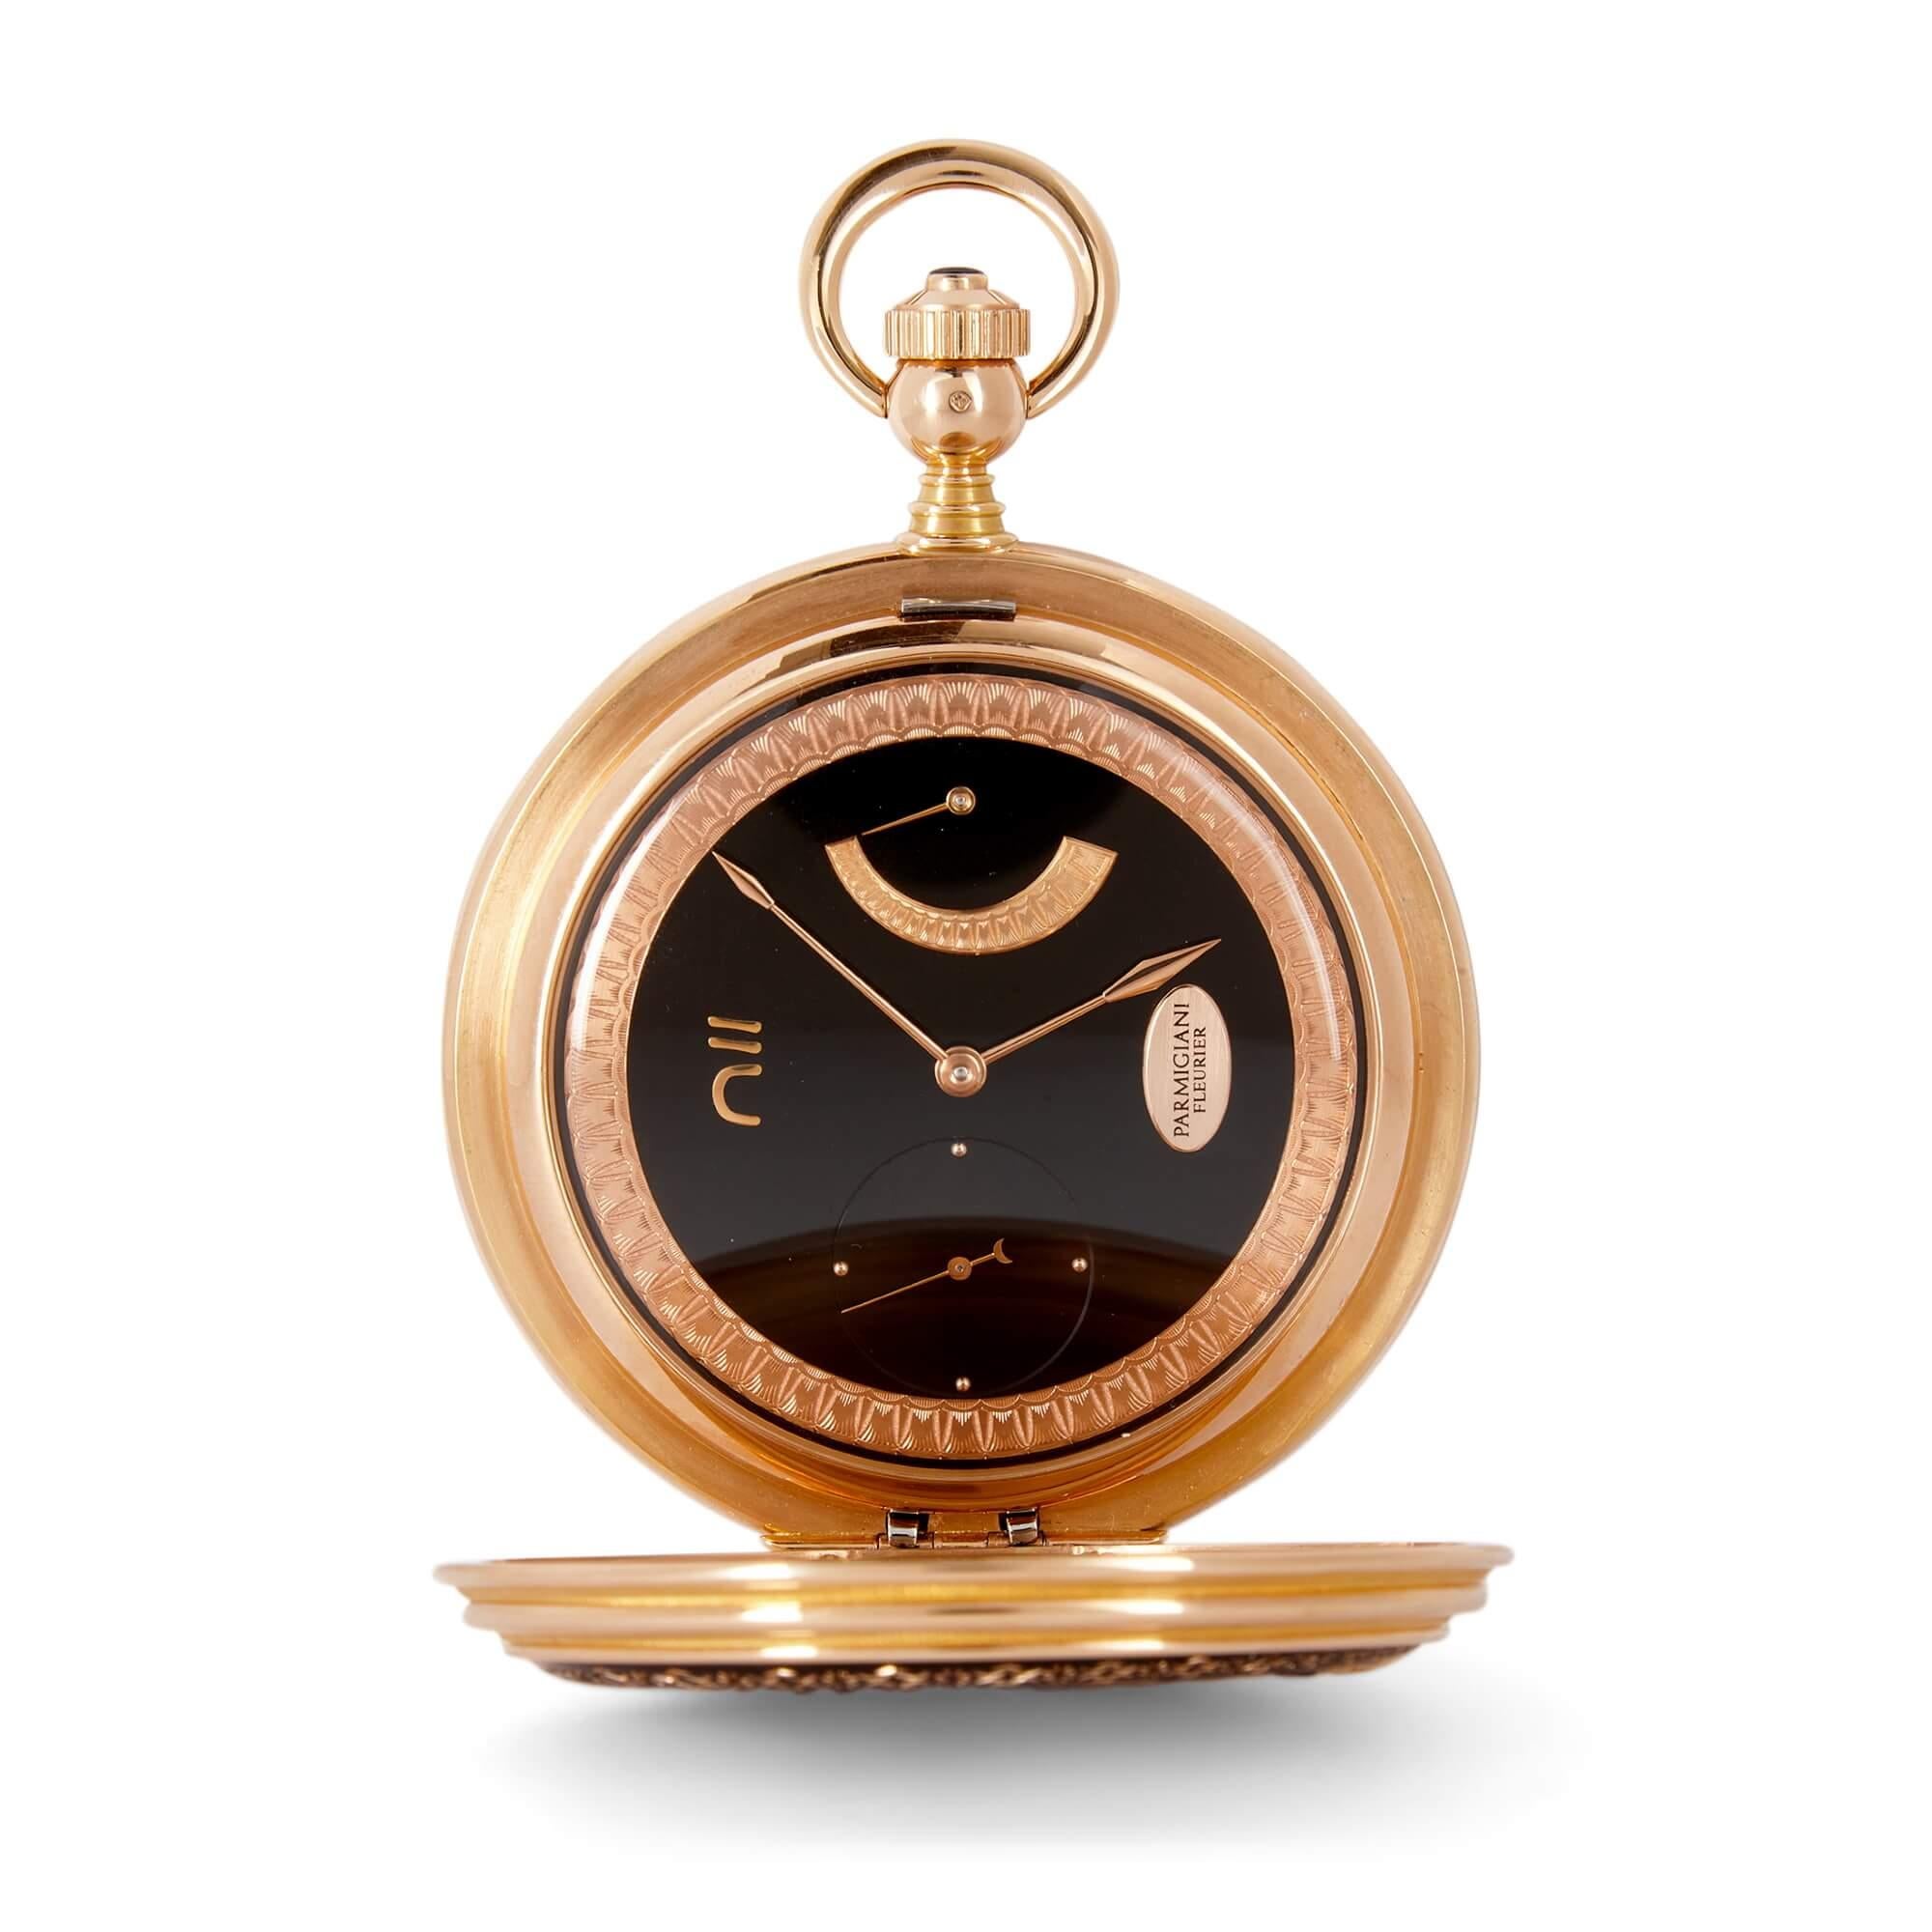 Parmigiani Fleurier, 'Nubia' - an extremely fine and unique 18K pink gold pocket watch
Swiss, Early 21st Century
Measures: Height 9cm, width 6.5cm, depth 1.5cm
Open: height 9.5cm, width 12.5cm, depth 6.5cm

This beautiful timepiece is a unique,